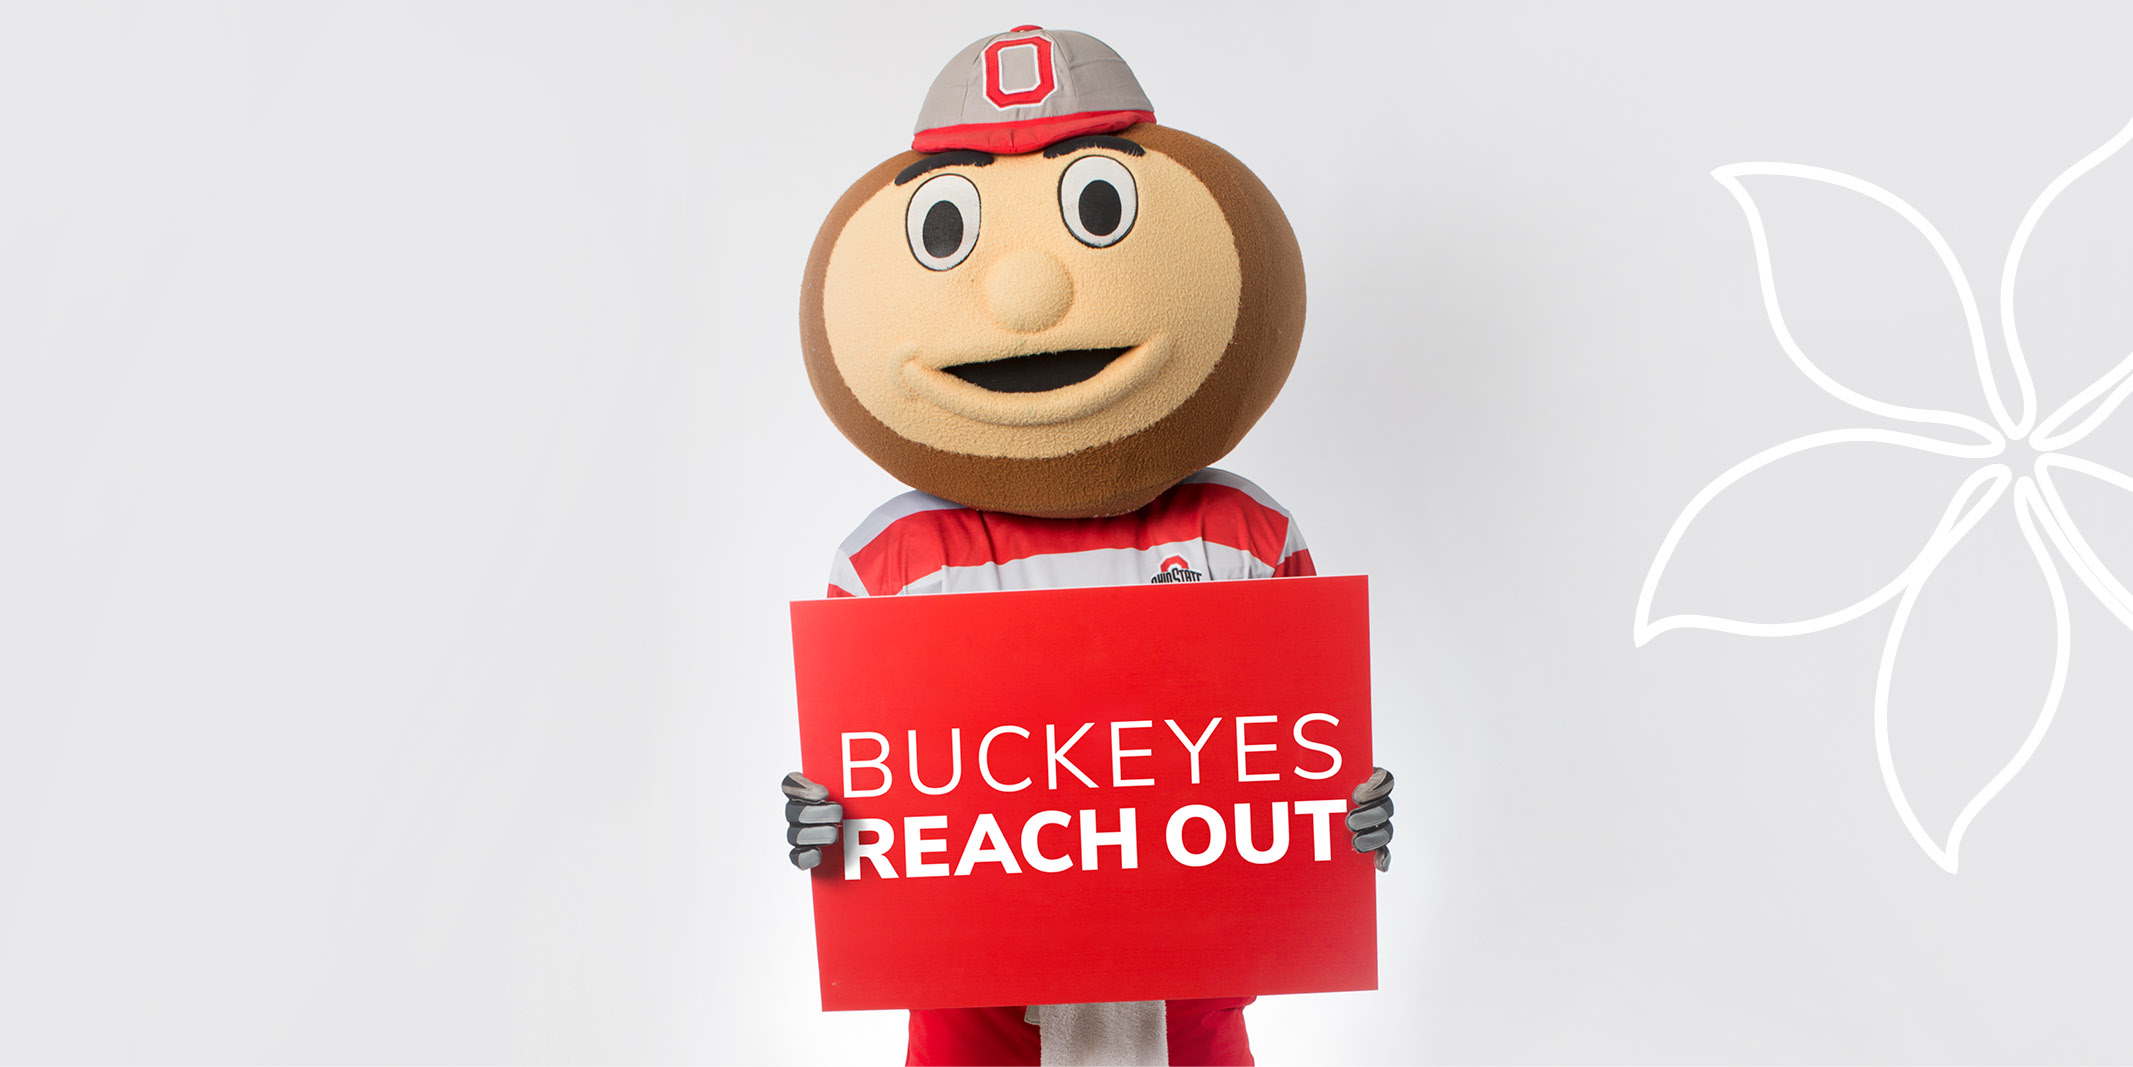 Brutus Buckeye holding a sign that says, "Buckeyes Reach Out."